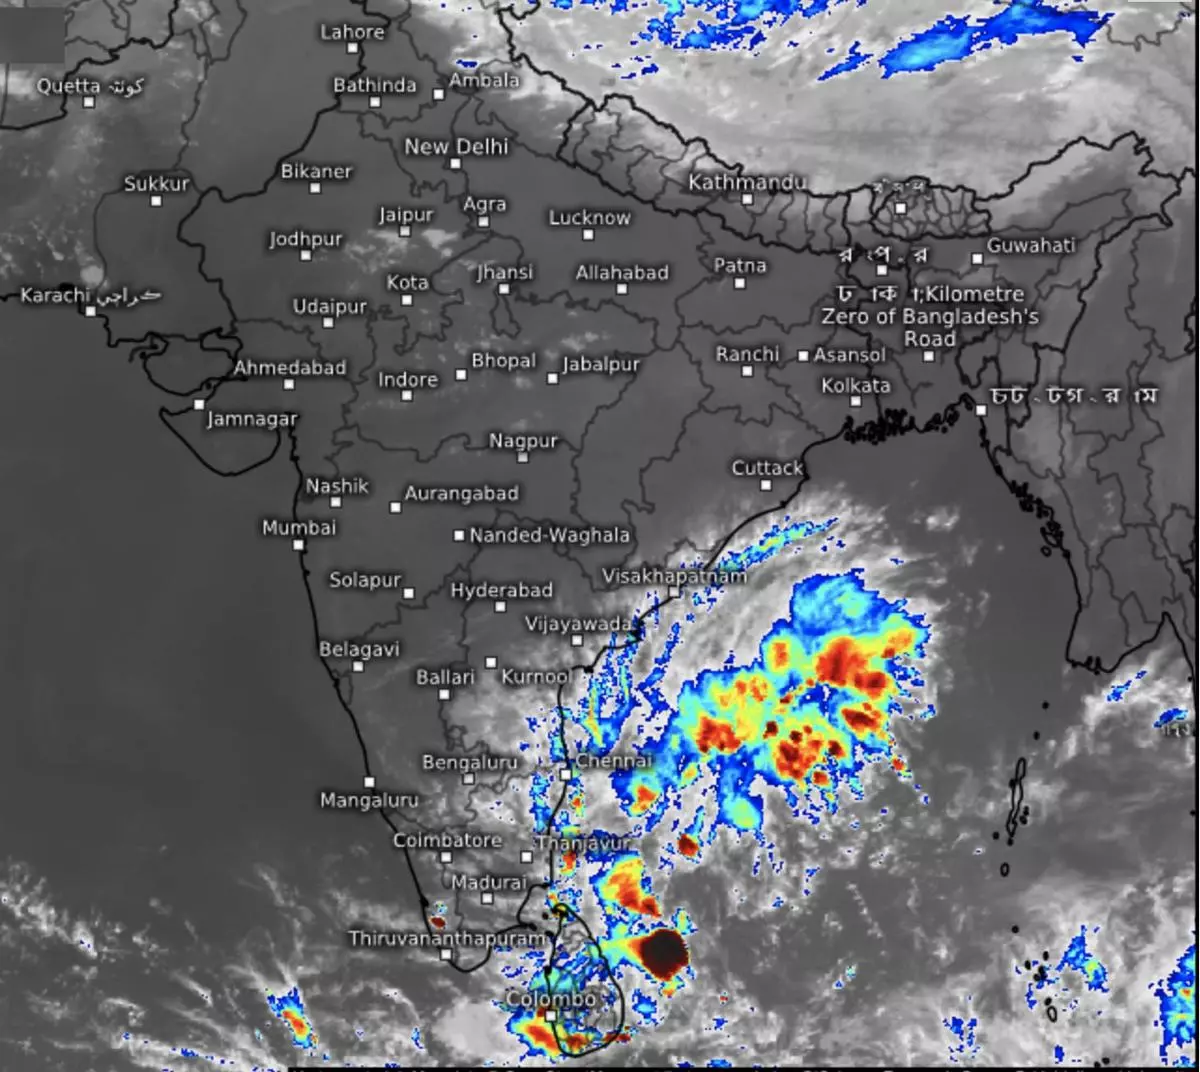 Thunderstorms farm out to the North of the low-pressure area of the Tamil Nadu and Andhra Pradesh coasts on Thursday evening as the weather system prepares to intensify over the next couple of days.